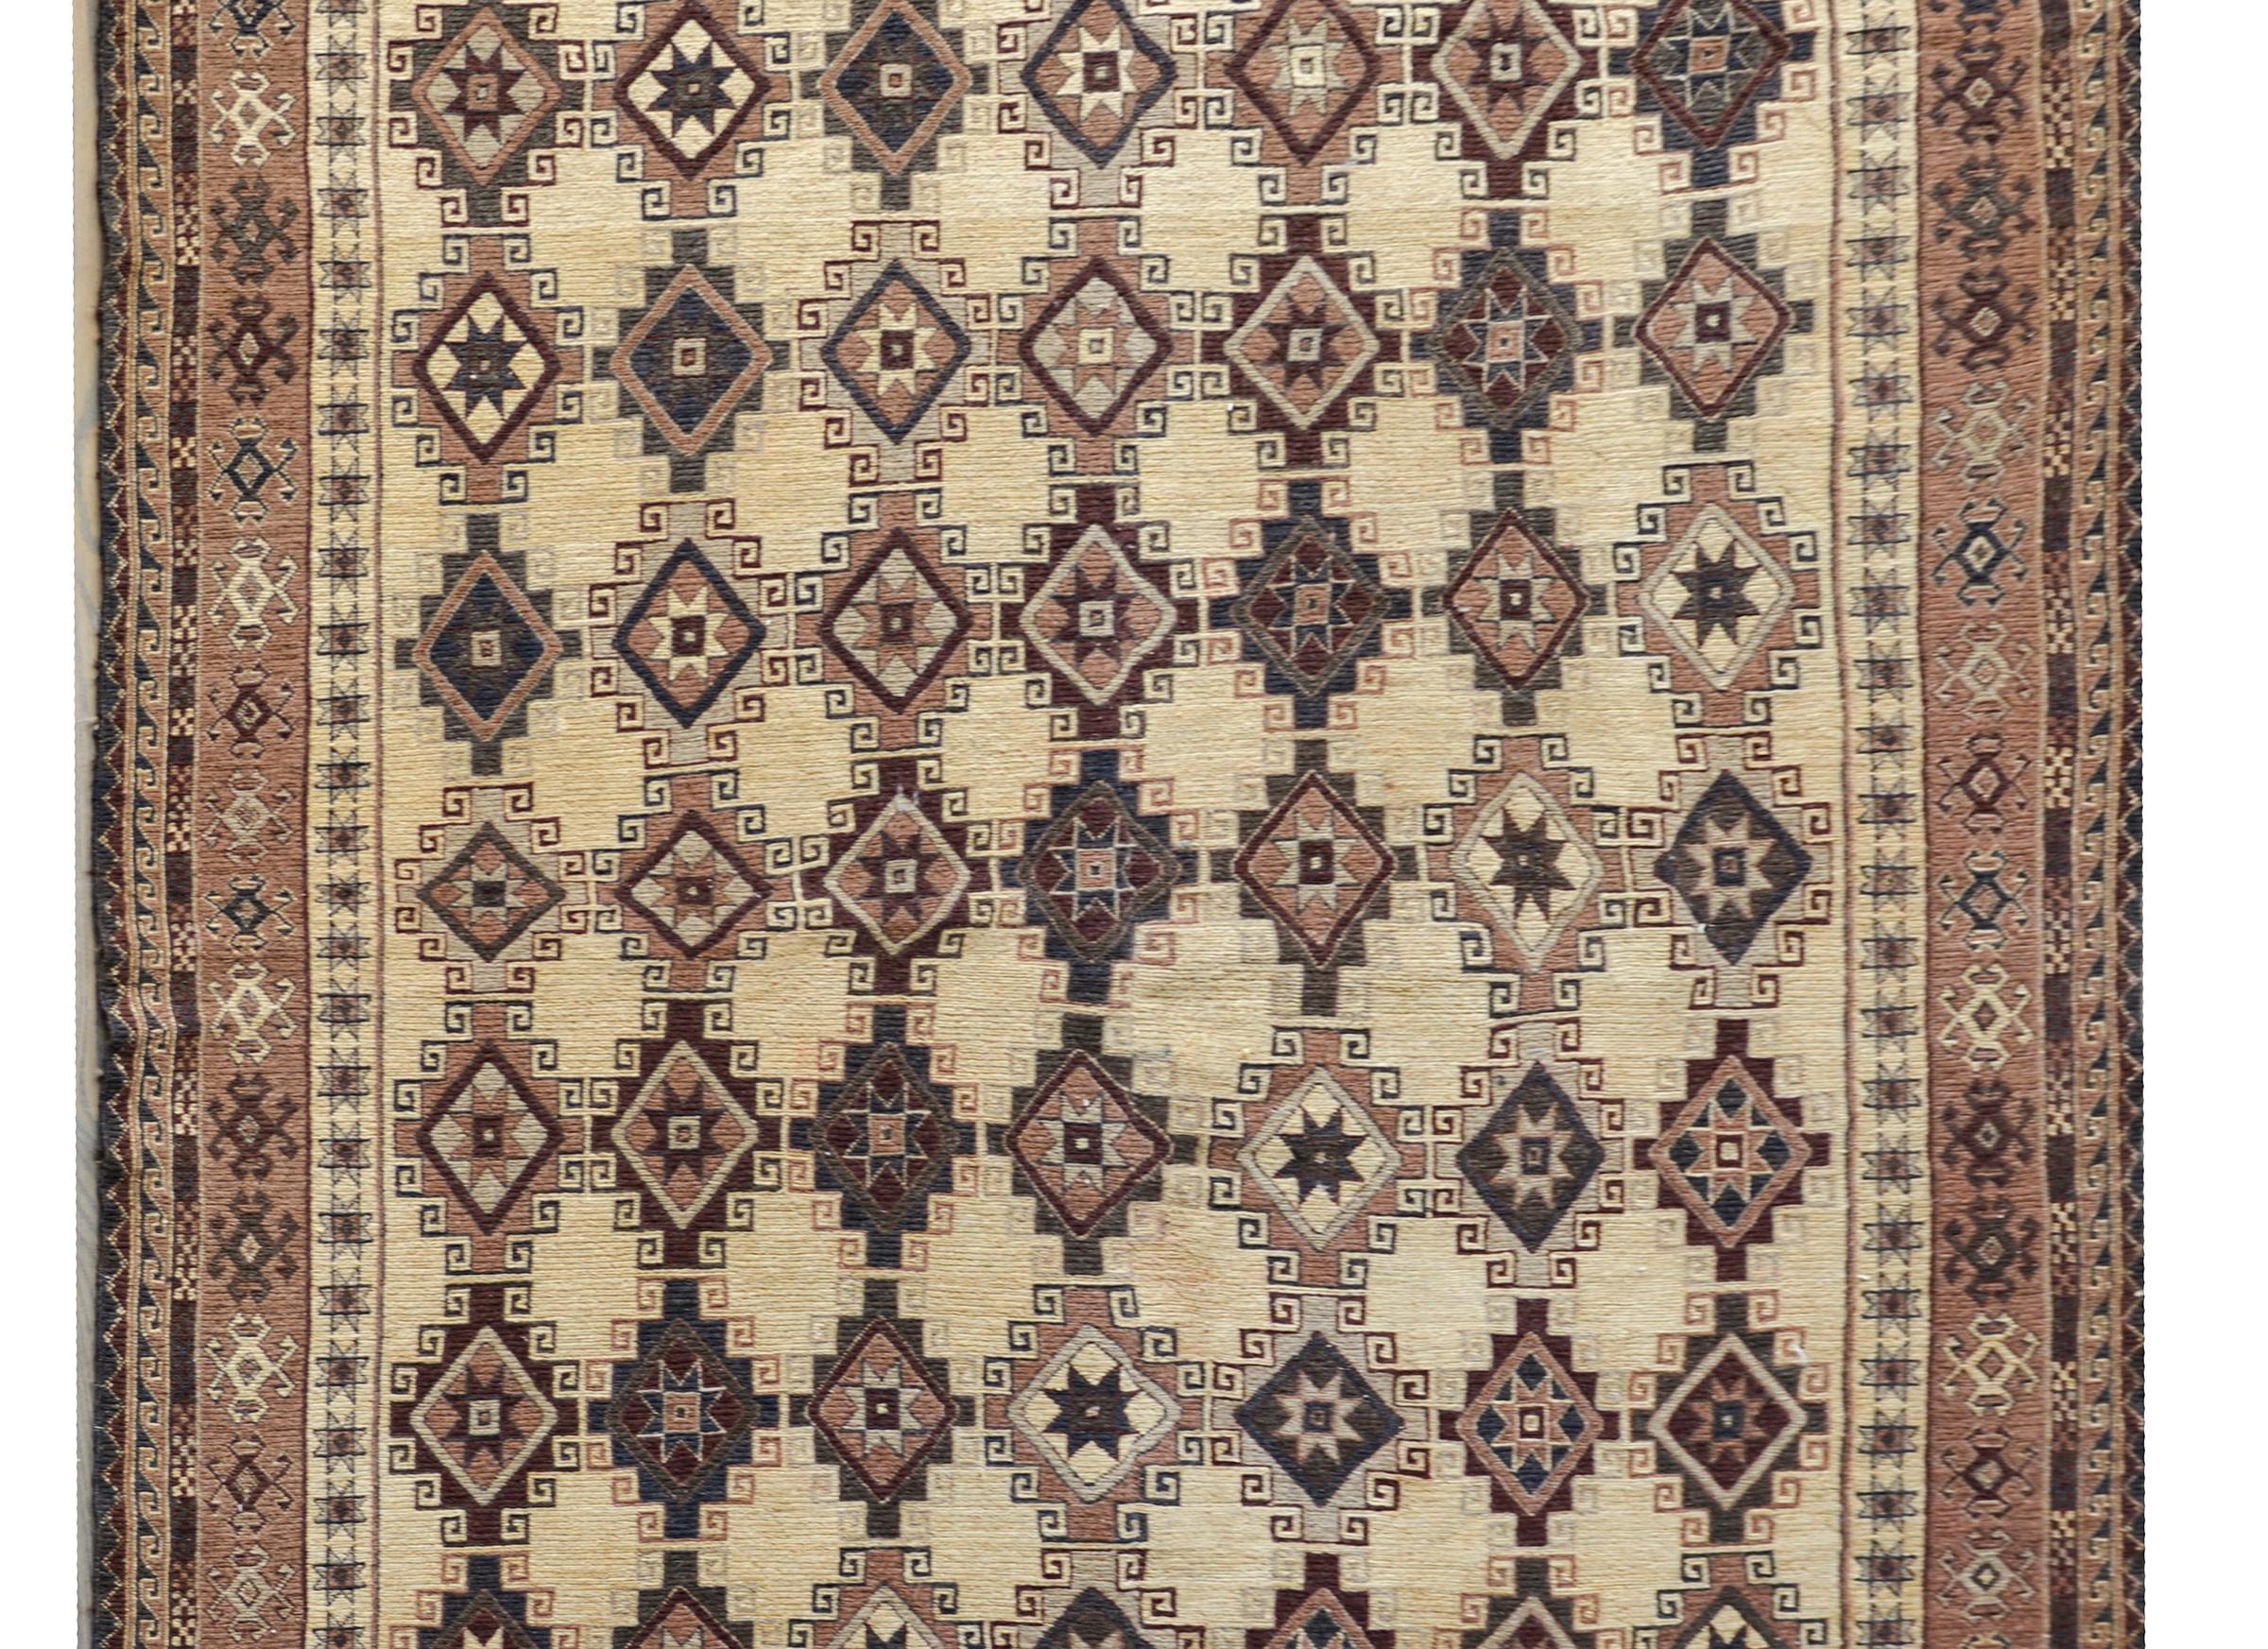 A wonderful vintage Afghani Sumack rug with an all-over diamond pattern woven in muted reds, indigos, pinks, and creams, and surrounded by a wide border with a wonderful stylized floral pattern woven in similar colors as the field.